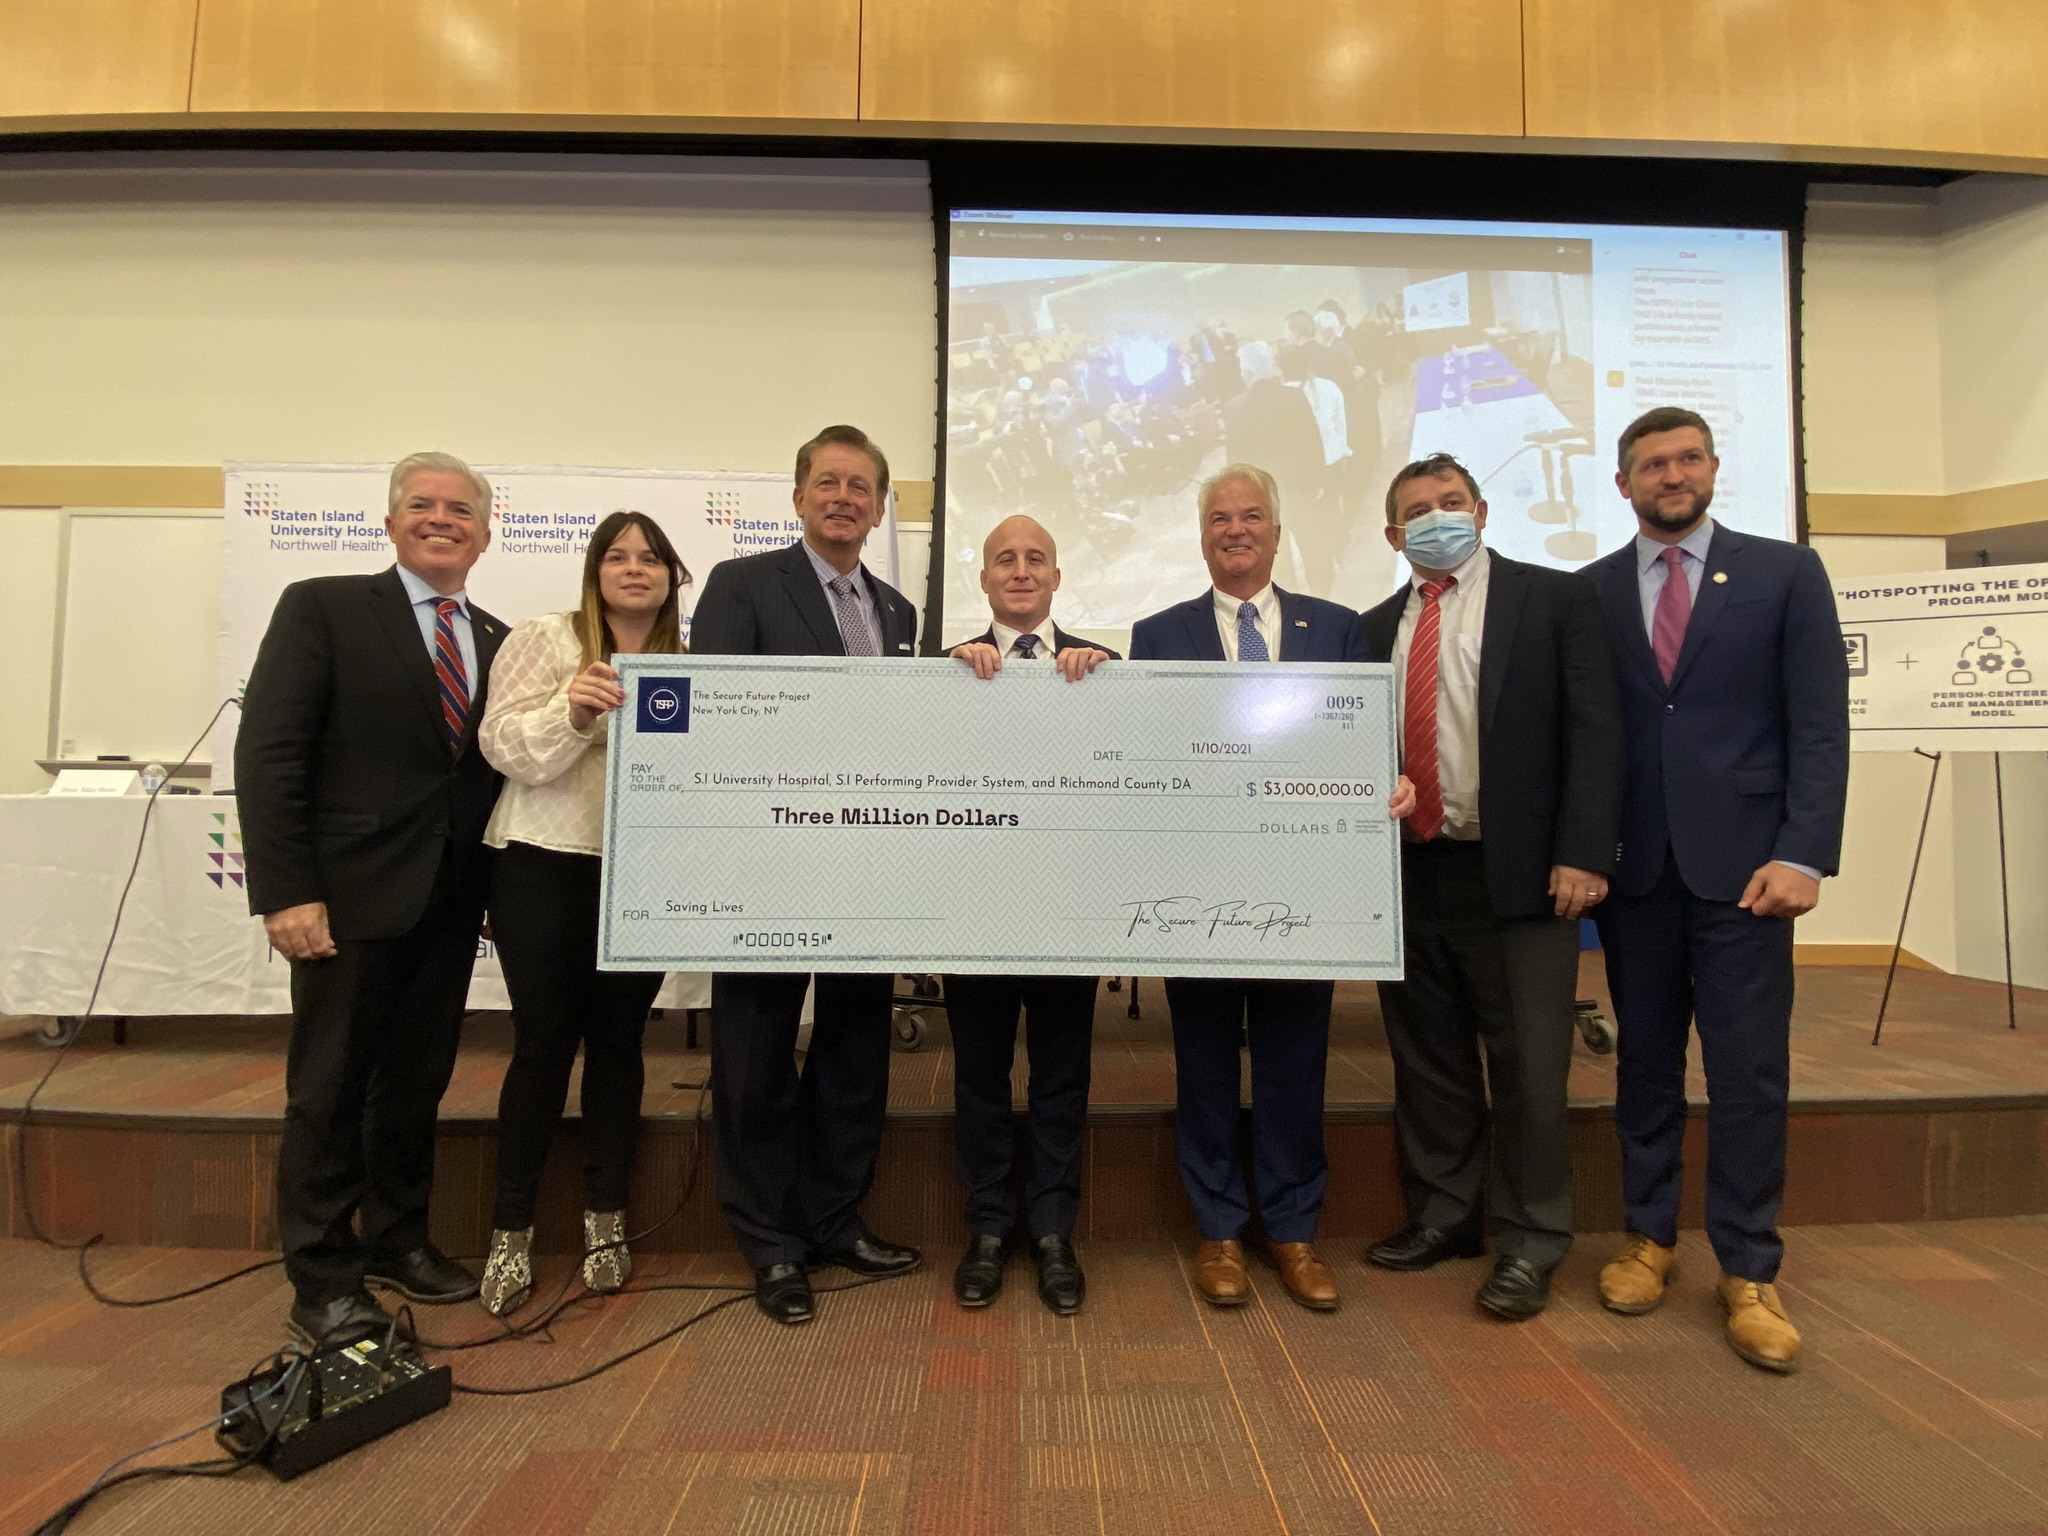 [Press Release] Staten Island Performing Provider System and Partners Announce $4 Million Investment From The Secure Future Project and Northwell Health to Combat The Opioid Crisis